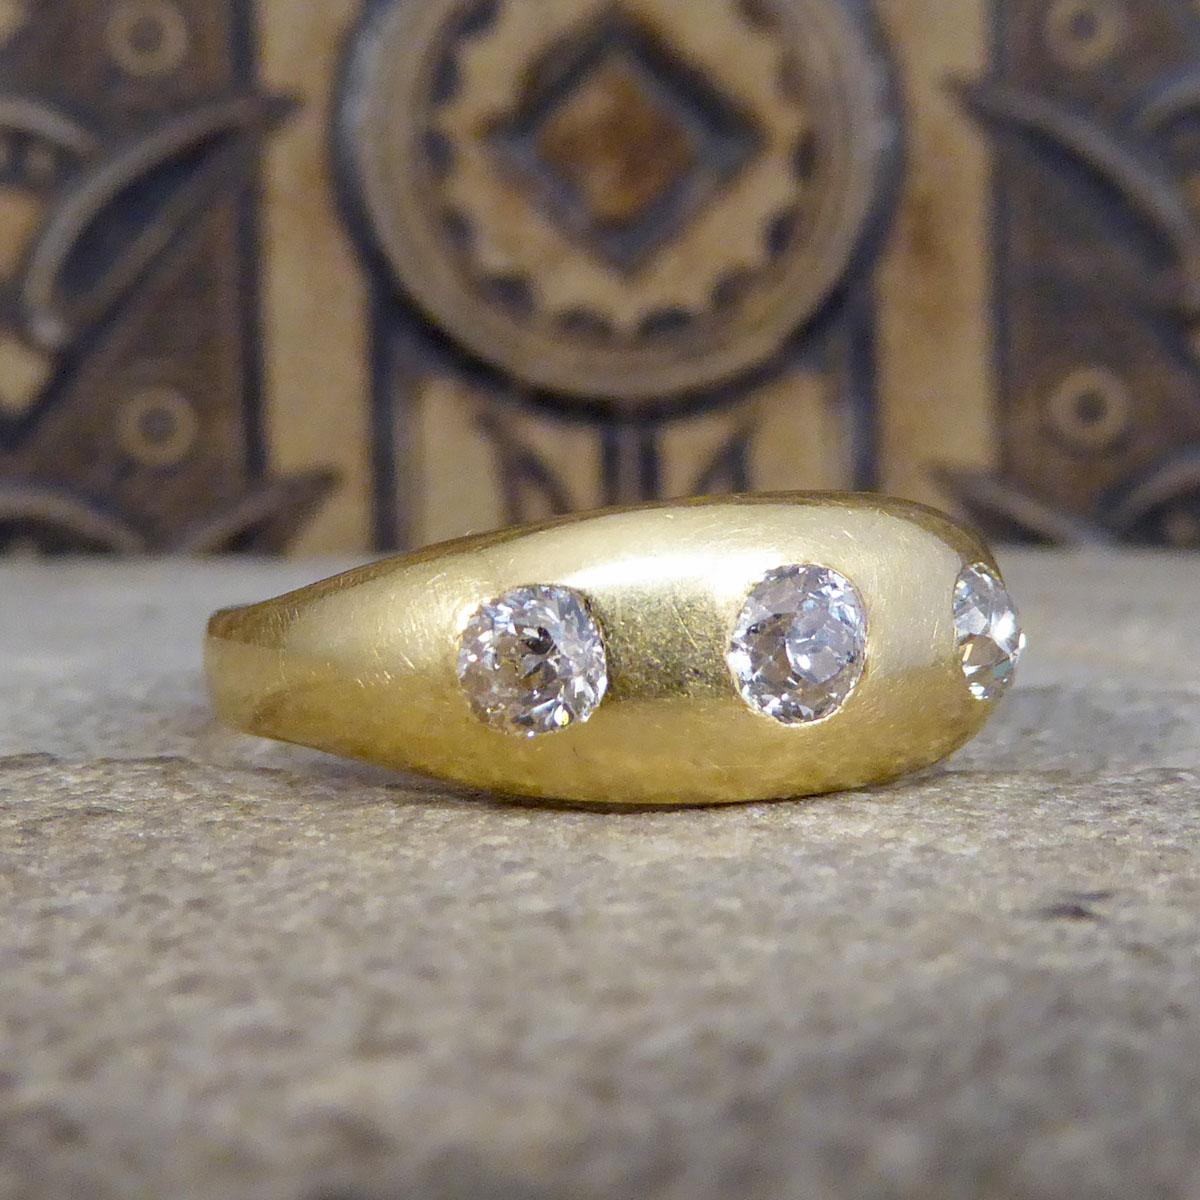 This antique three stone Diamond gypsy ring has been crafted in the Late Victorian and would fit a larger finger size of UK W or US 11. To be worn by either men or women this stunning 18ct yellow Gold gypsy ring features three gorgeous bright Old